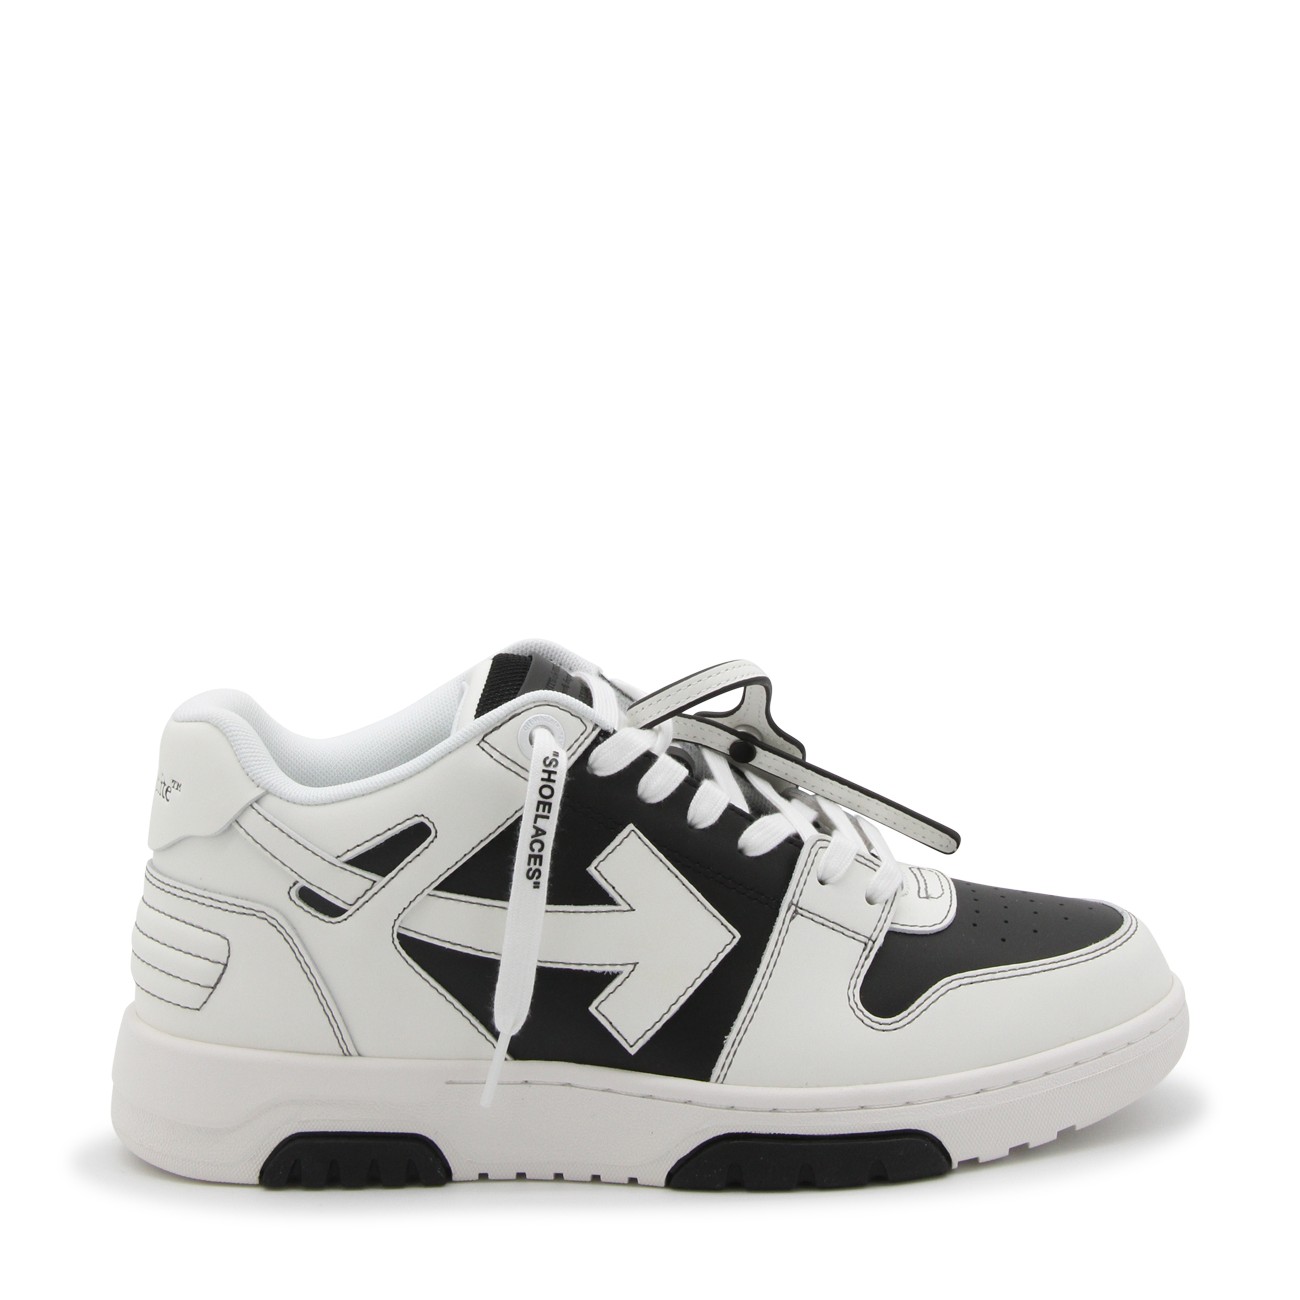 Out Of Office leather sneakers in black - Off White